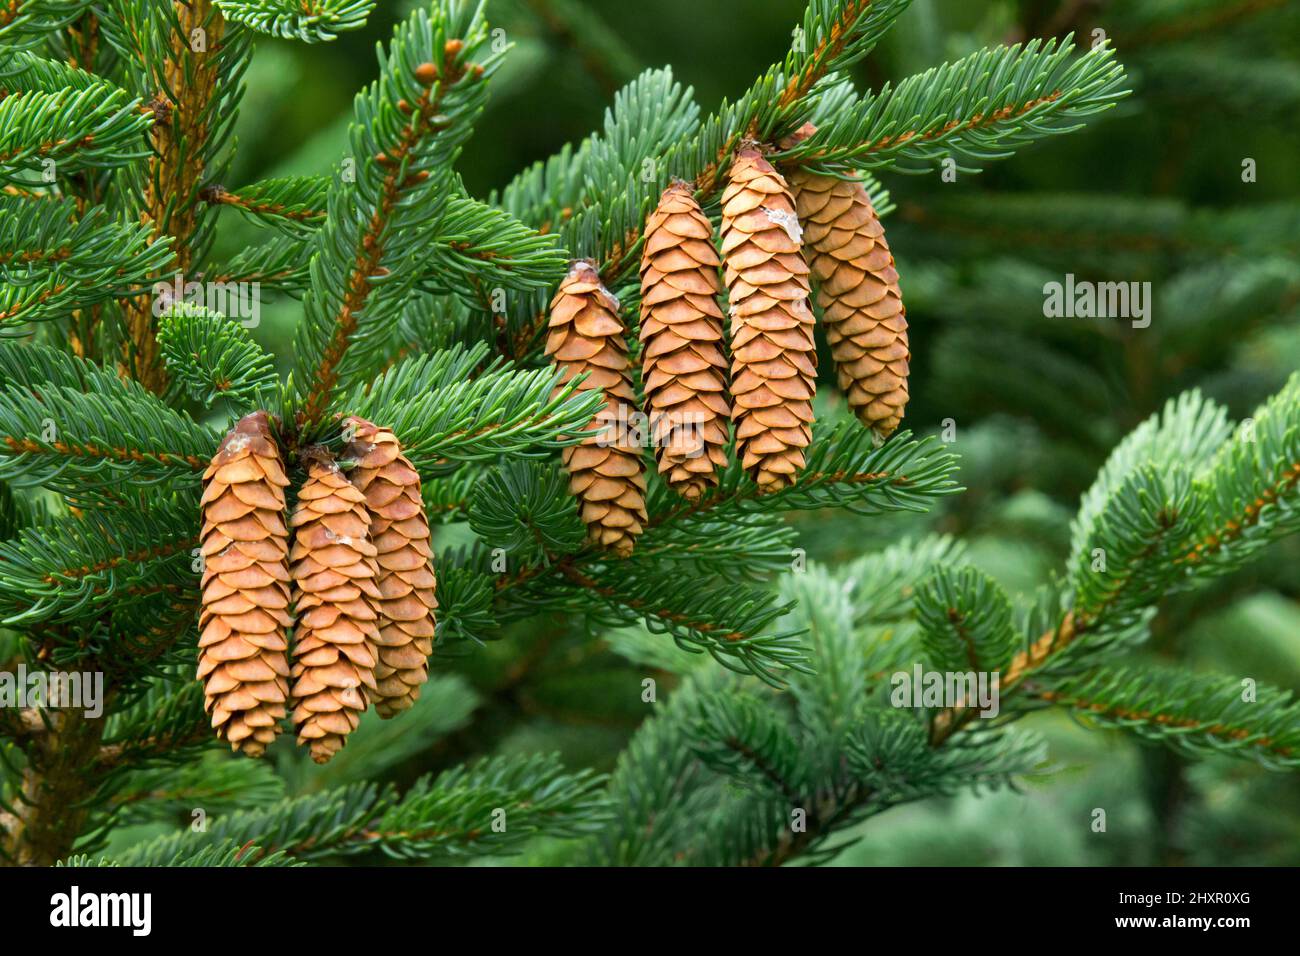 The ripe cones on ac White Spruce tree releasing its seeds in Pennsylvania's Pocono Mountains. Stock Photo